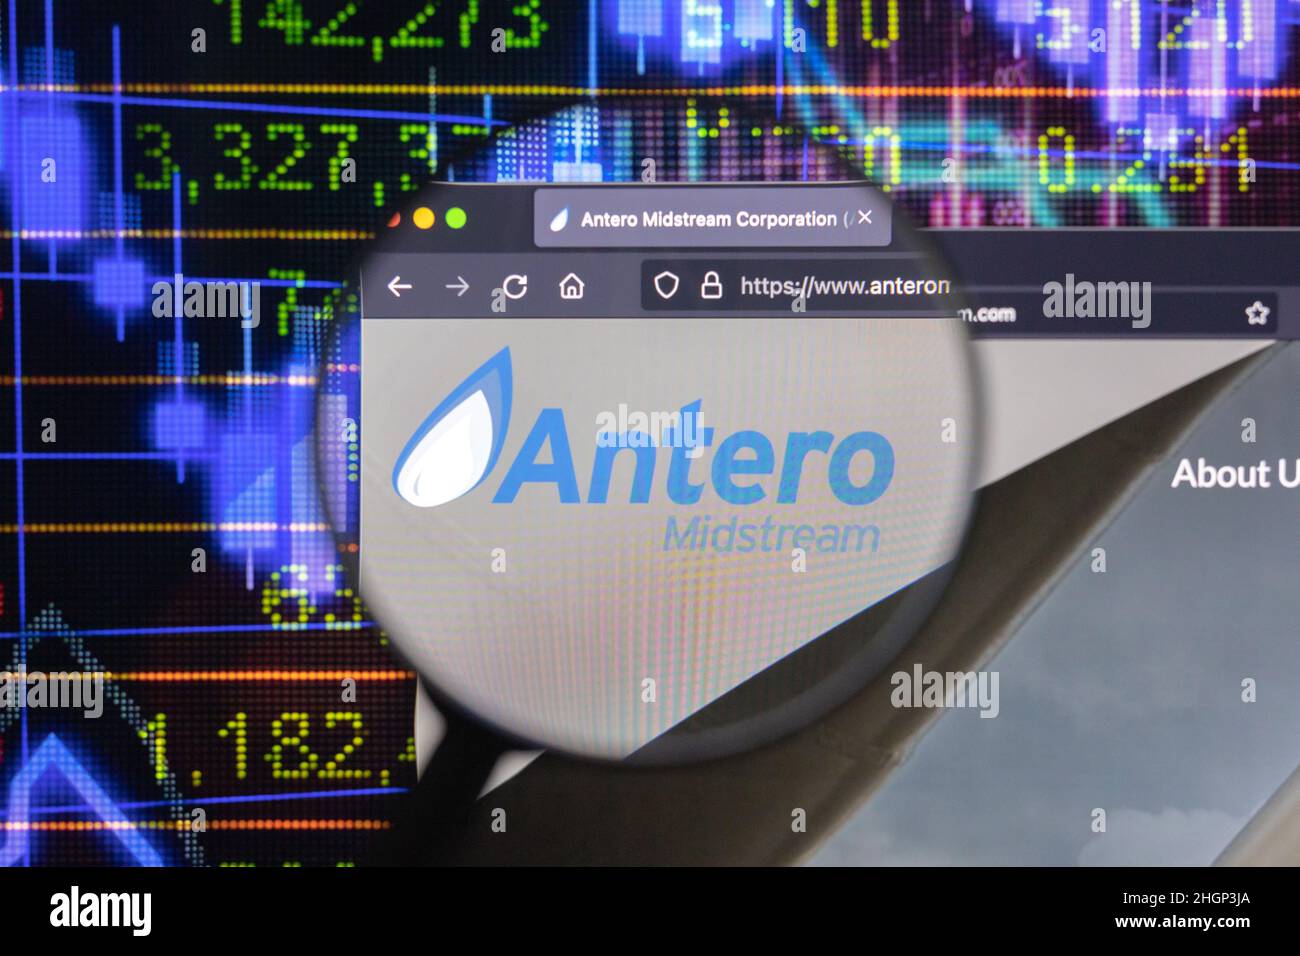 Antero company logo on a website with blurry stock market developments in the background, seen on a computer screen through a magnifying glass. Stock Photo